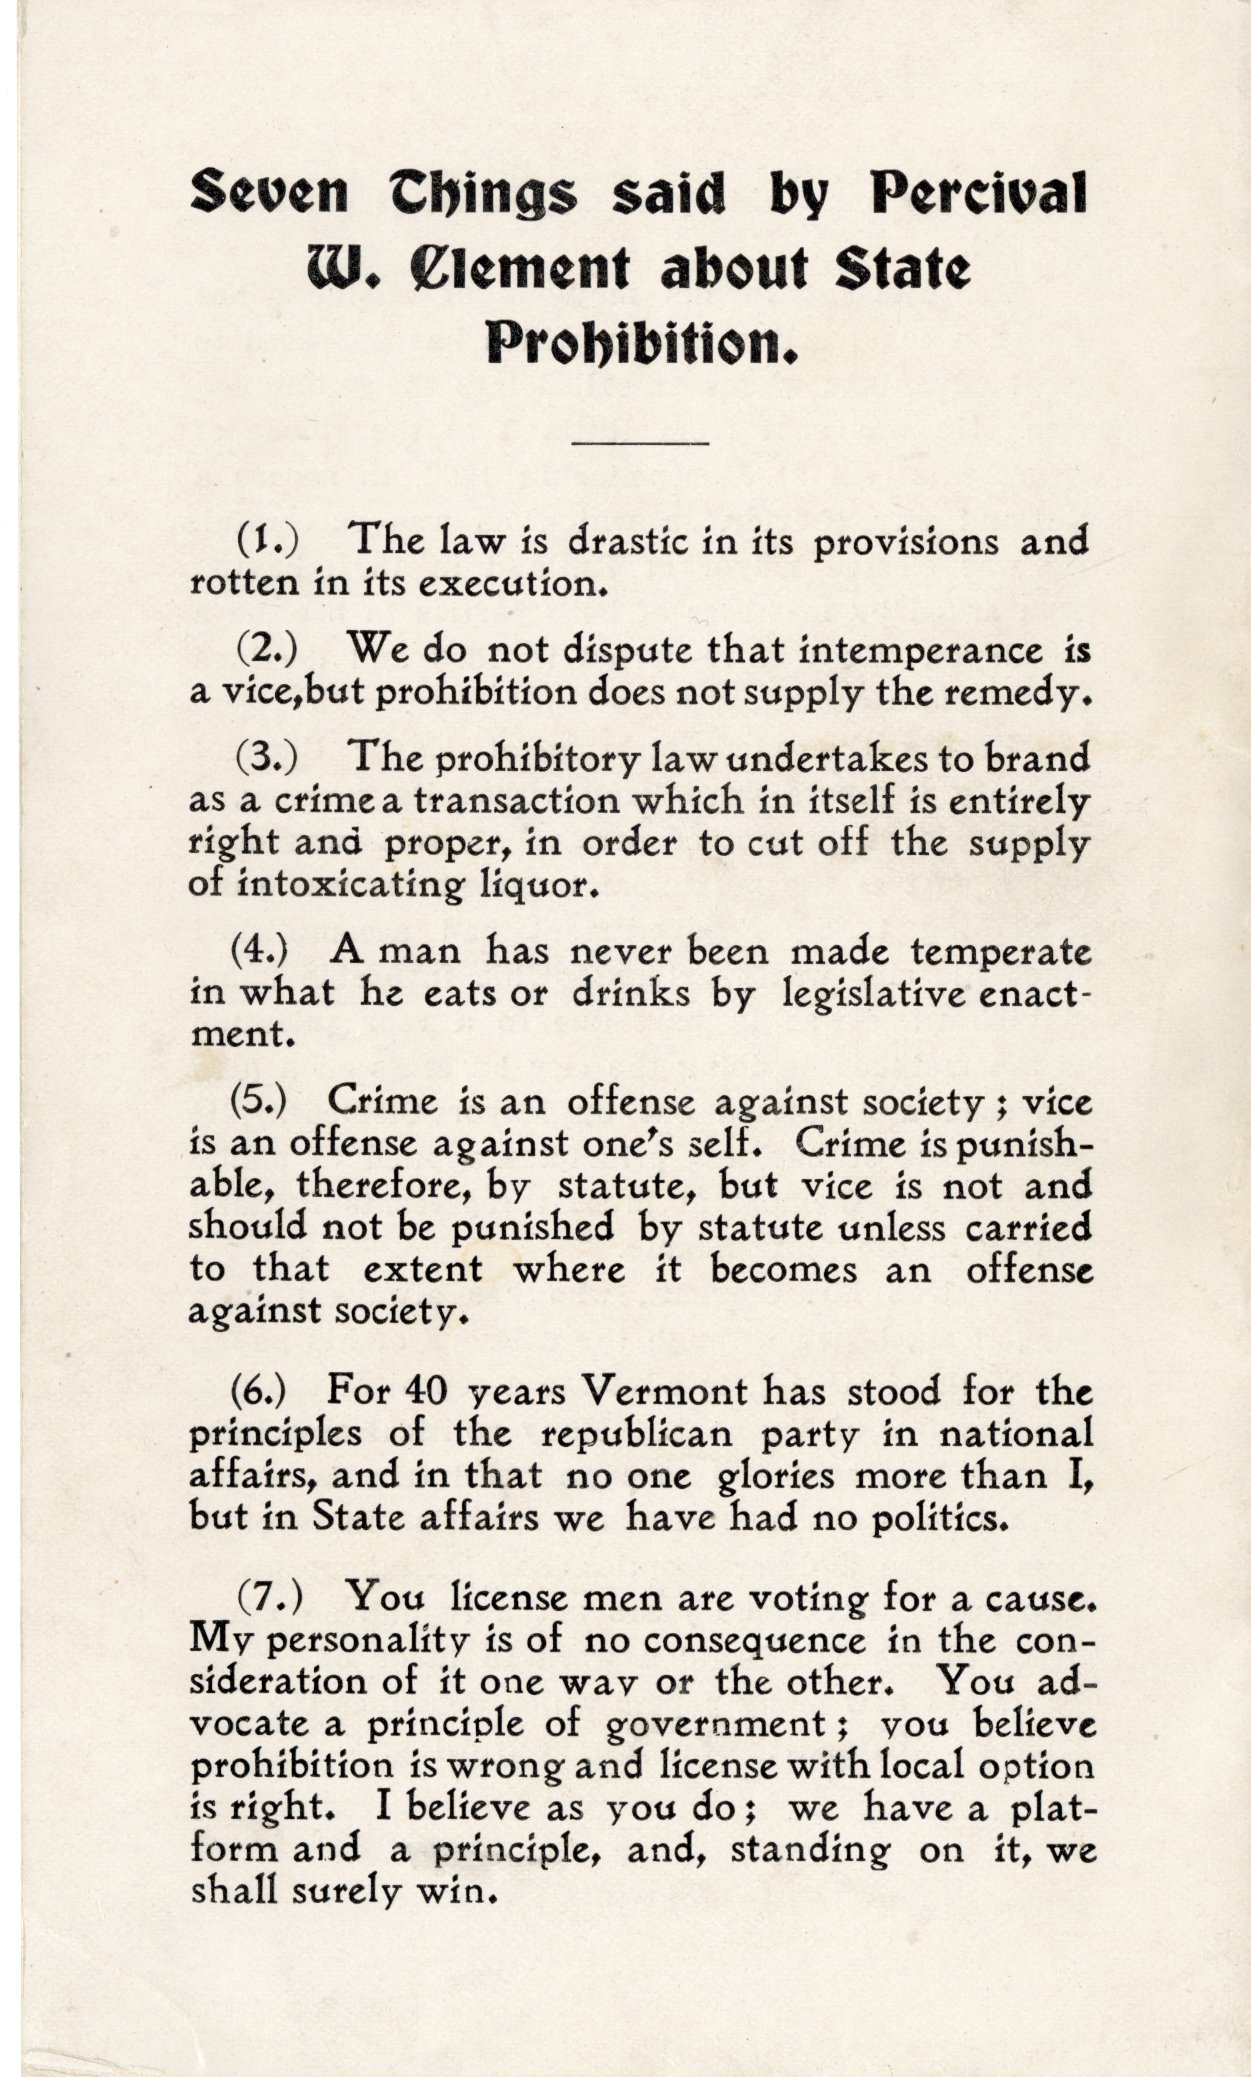 Back cover of a campaign brochure with a list of seven things Percival W. Clement said about State Prohibition.